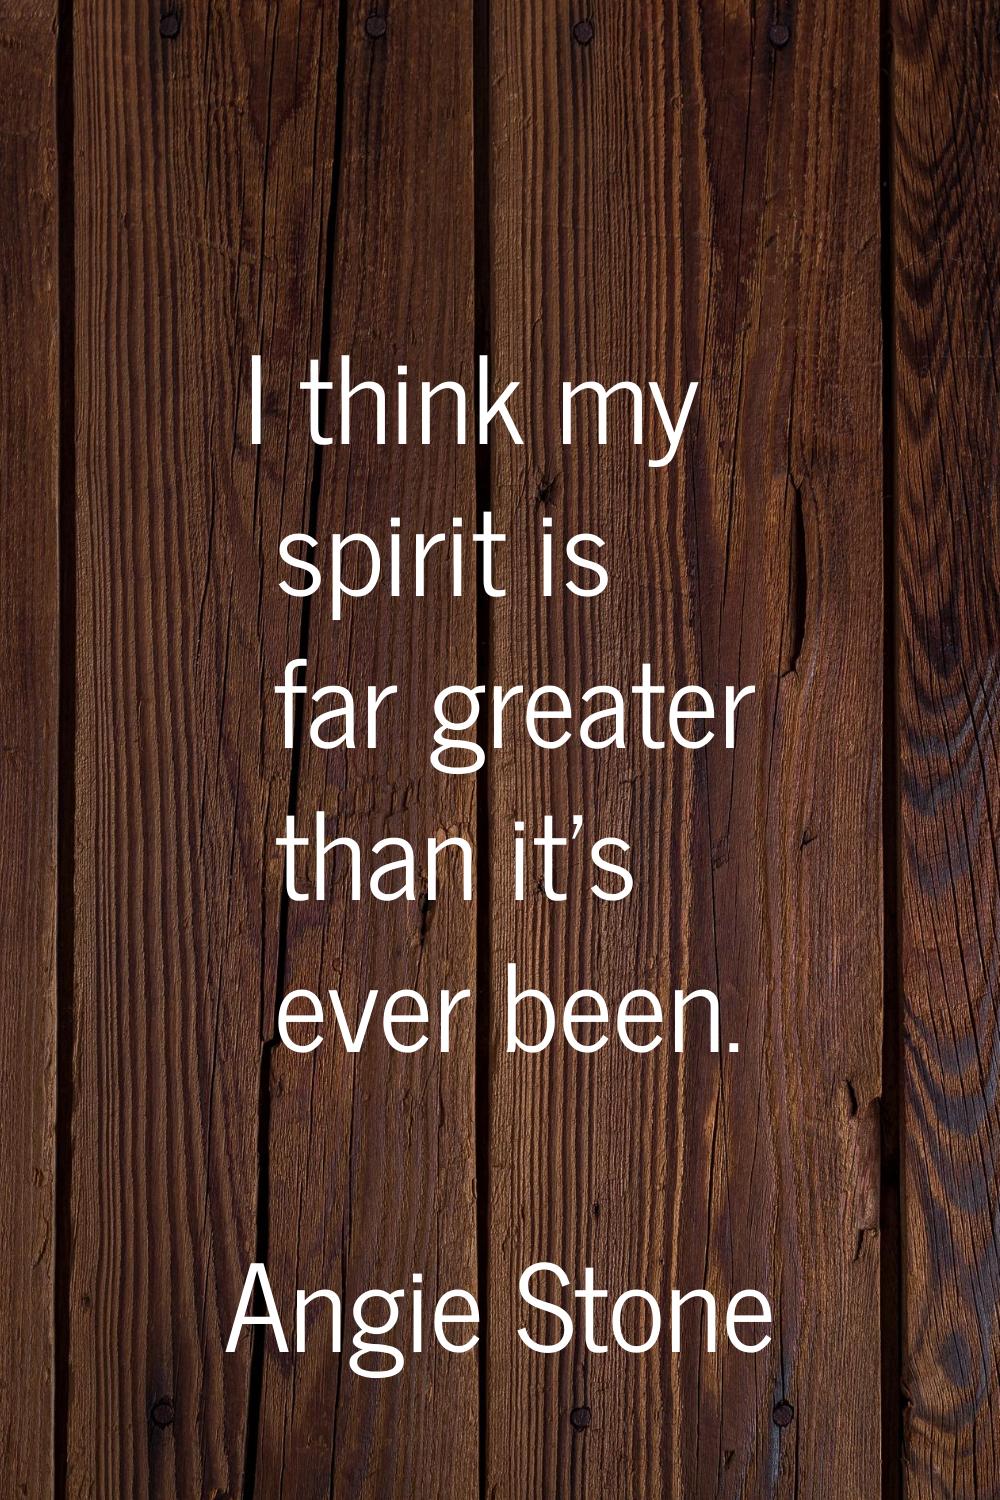 I think my spirit is far greater than it's ever been.